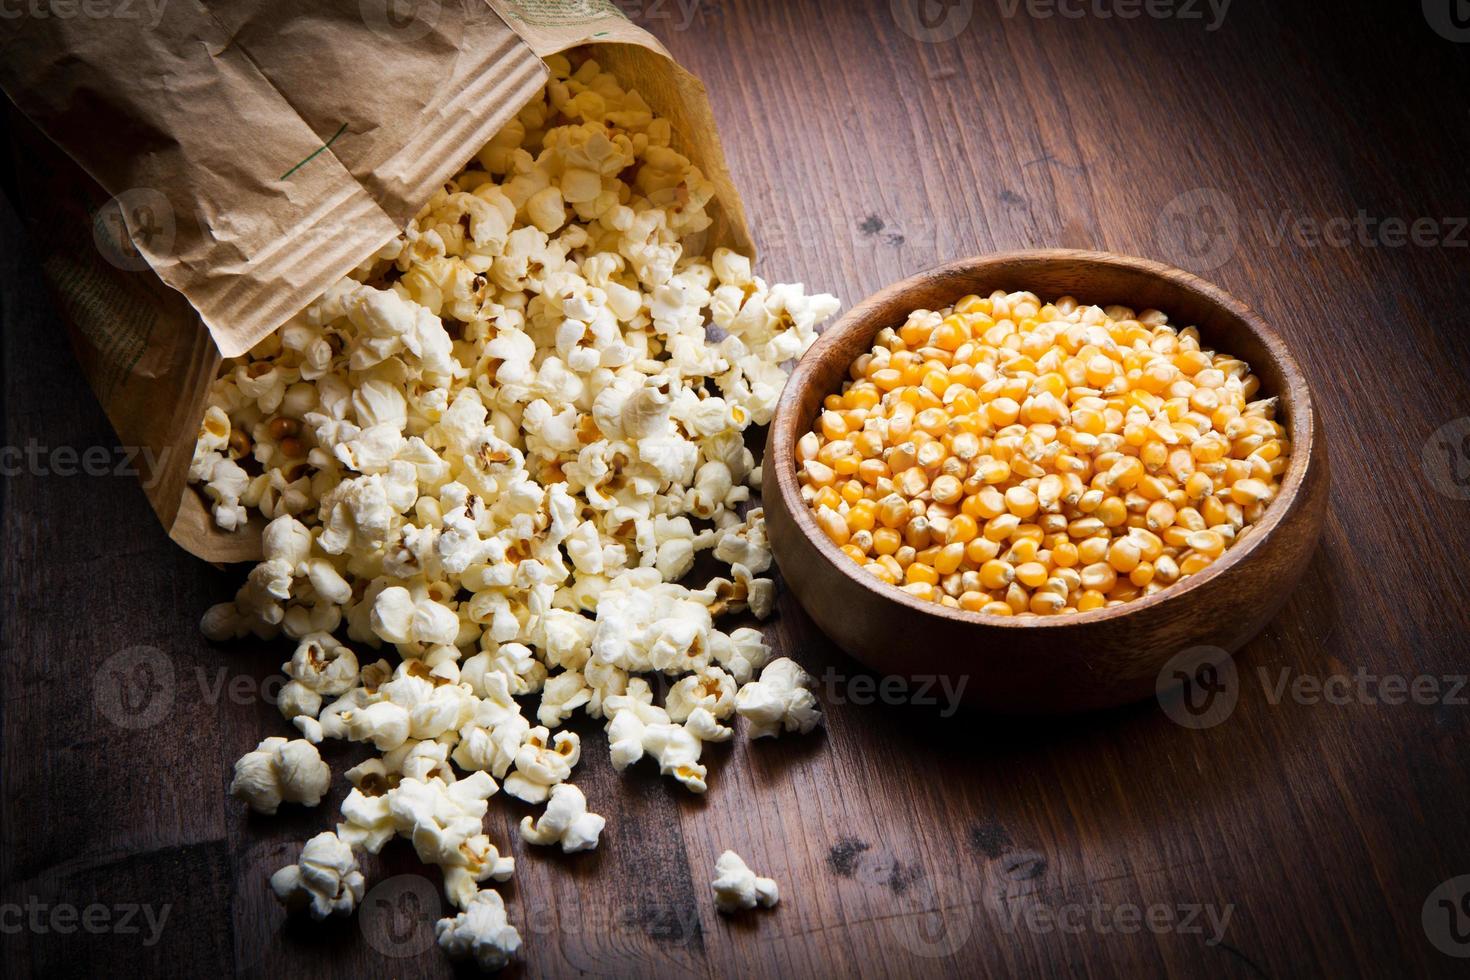 bowl of popcorn and kernelson a wooden table photo